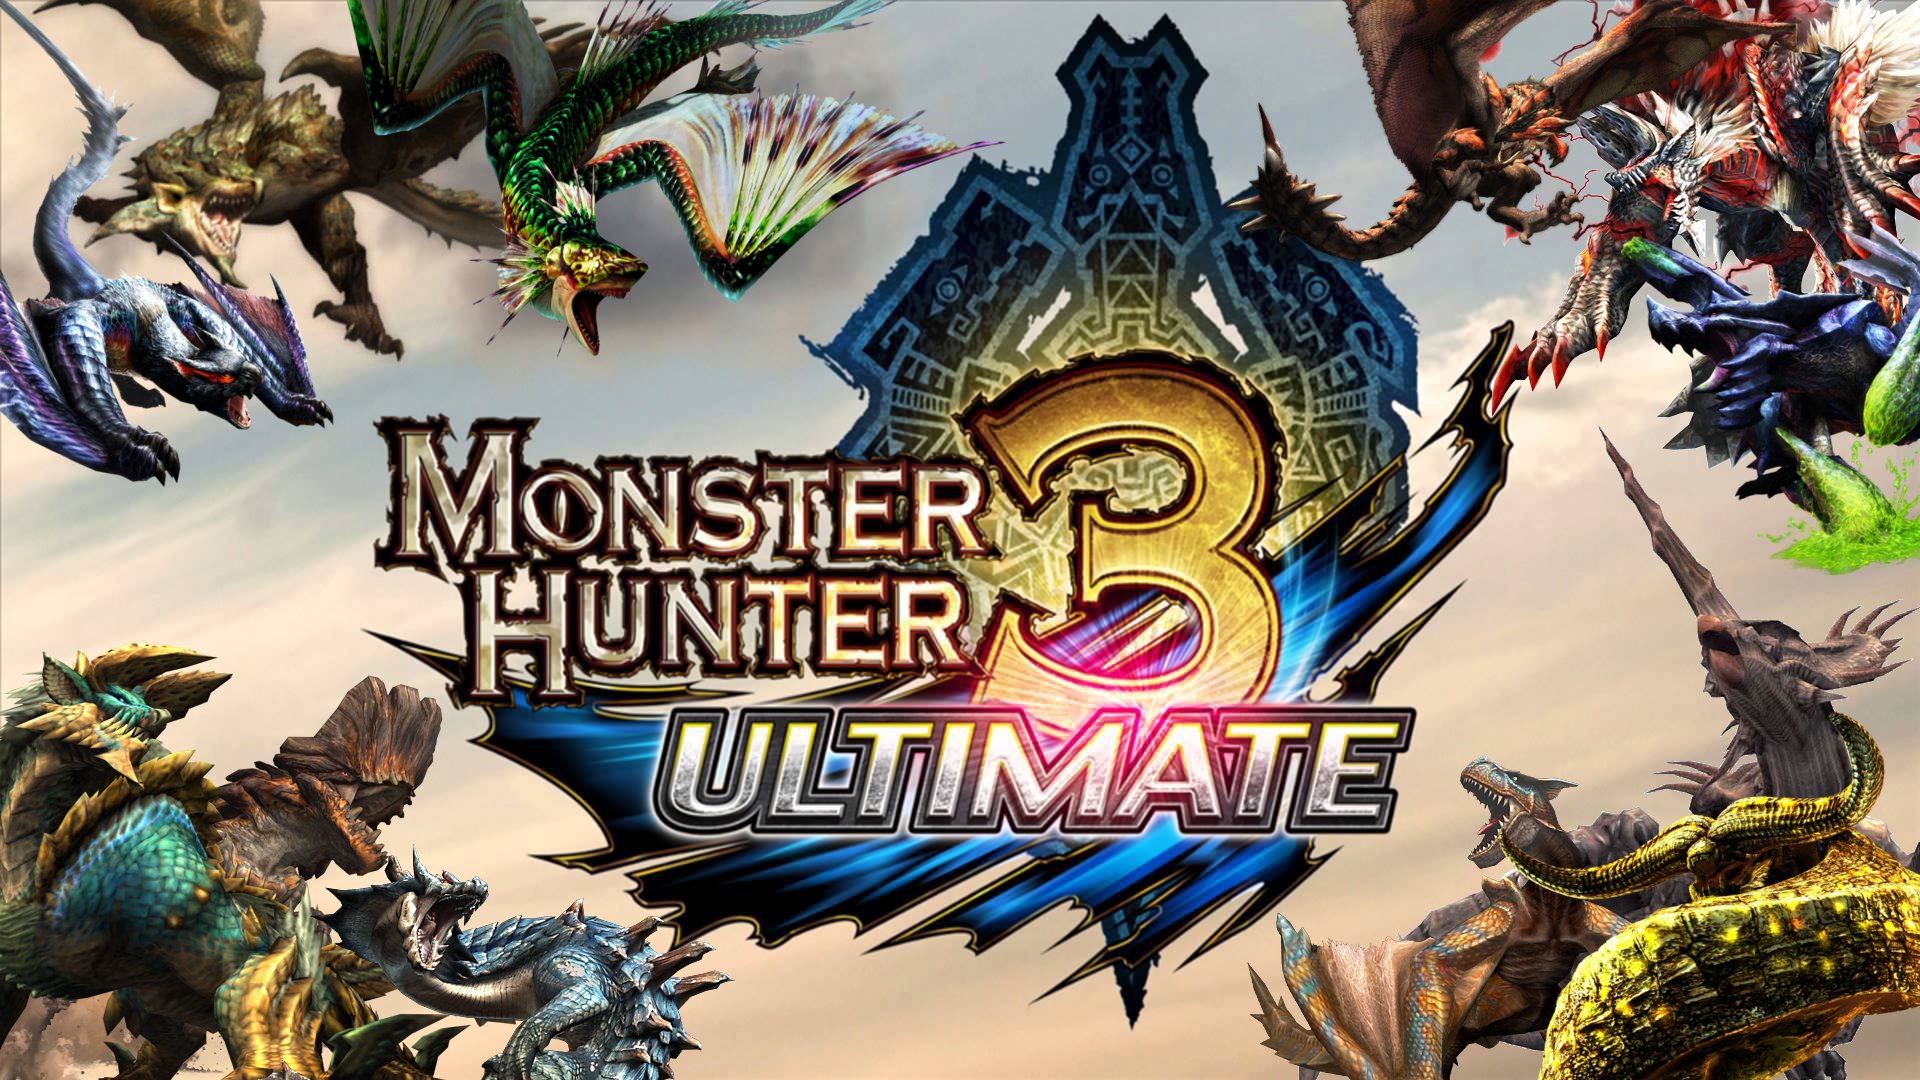 monster hunter portable 3rd cwcheat codes psp